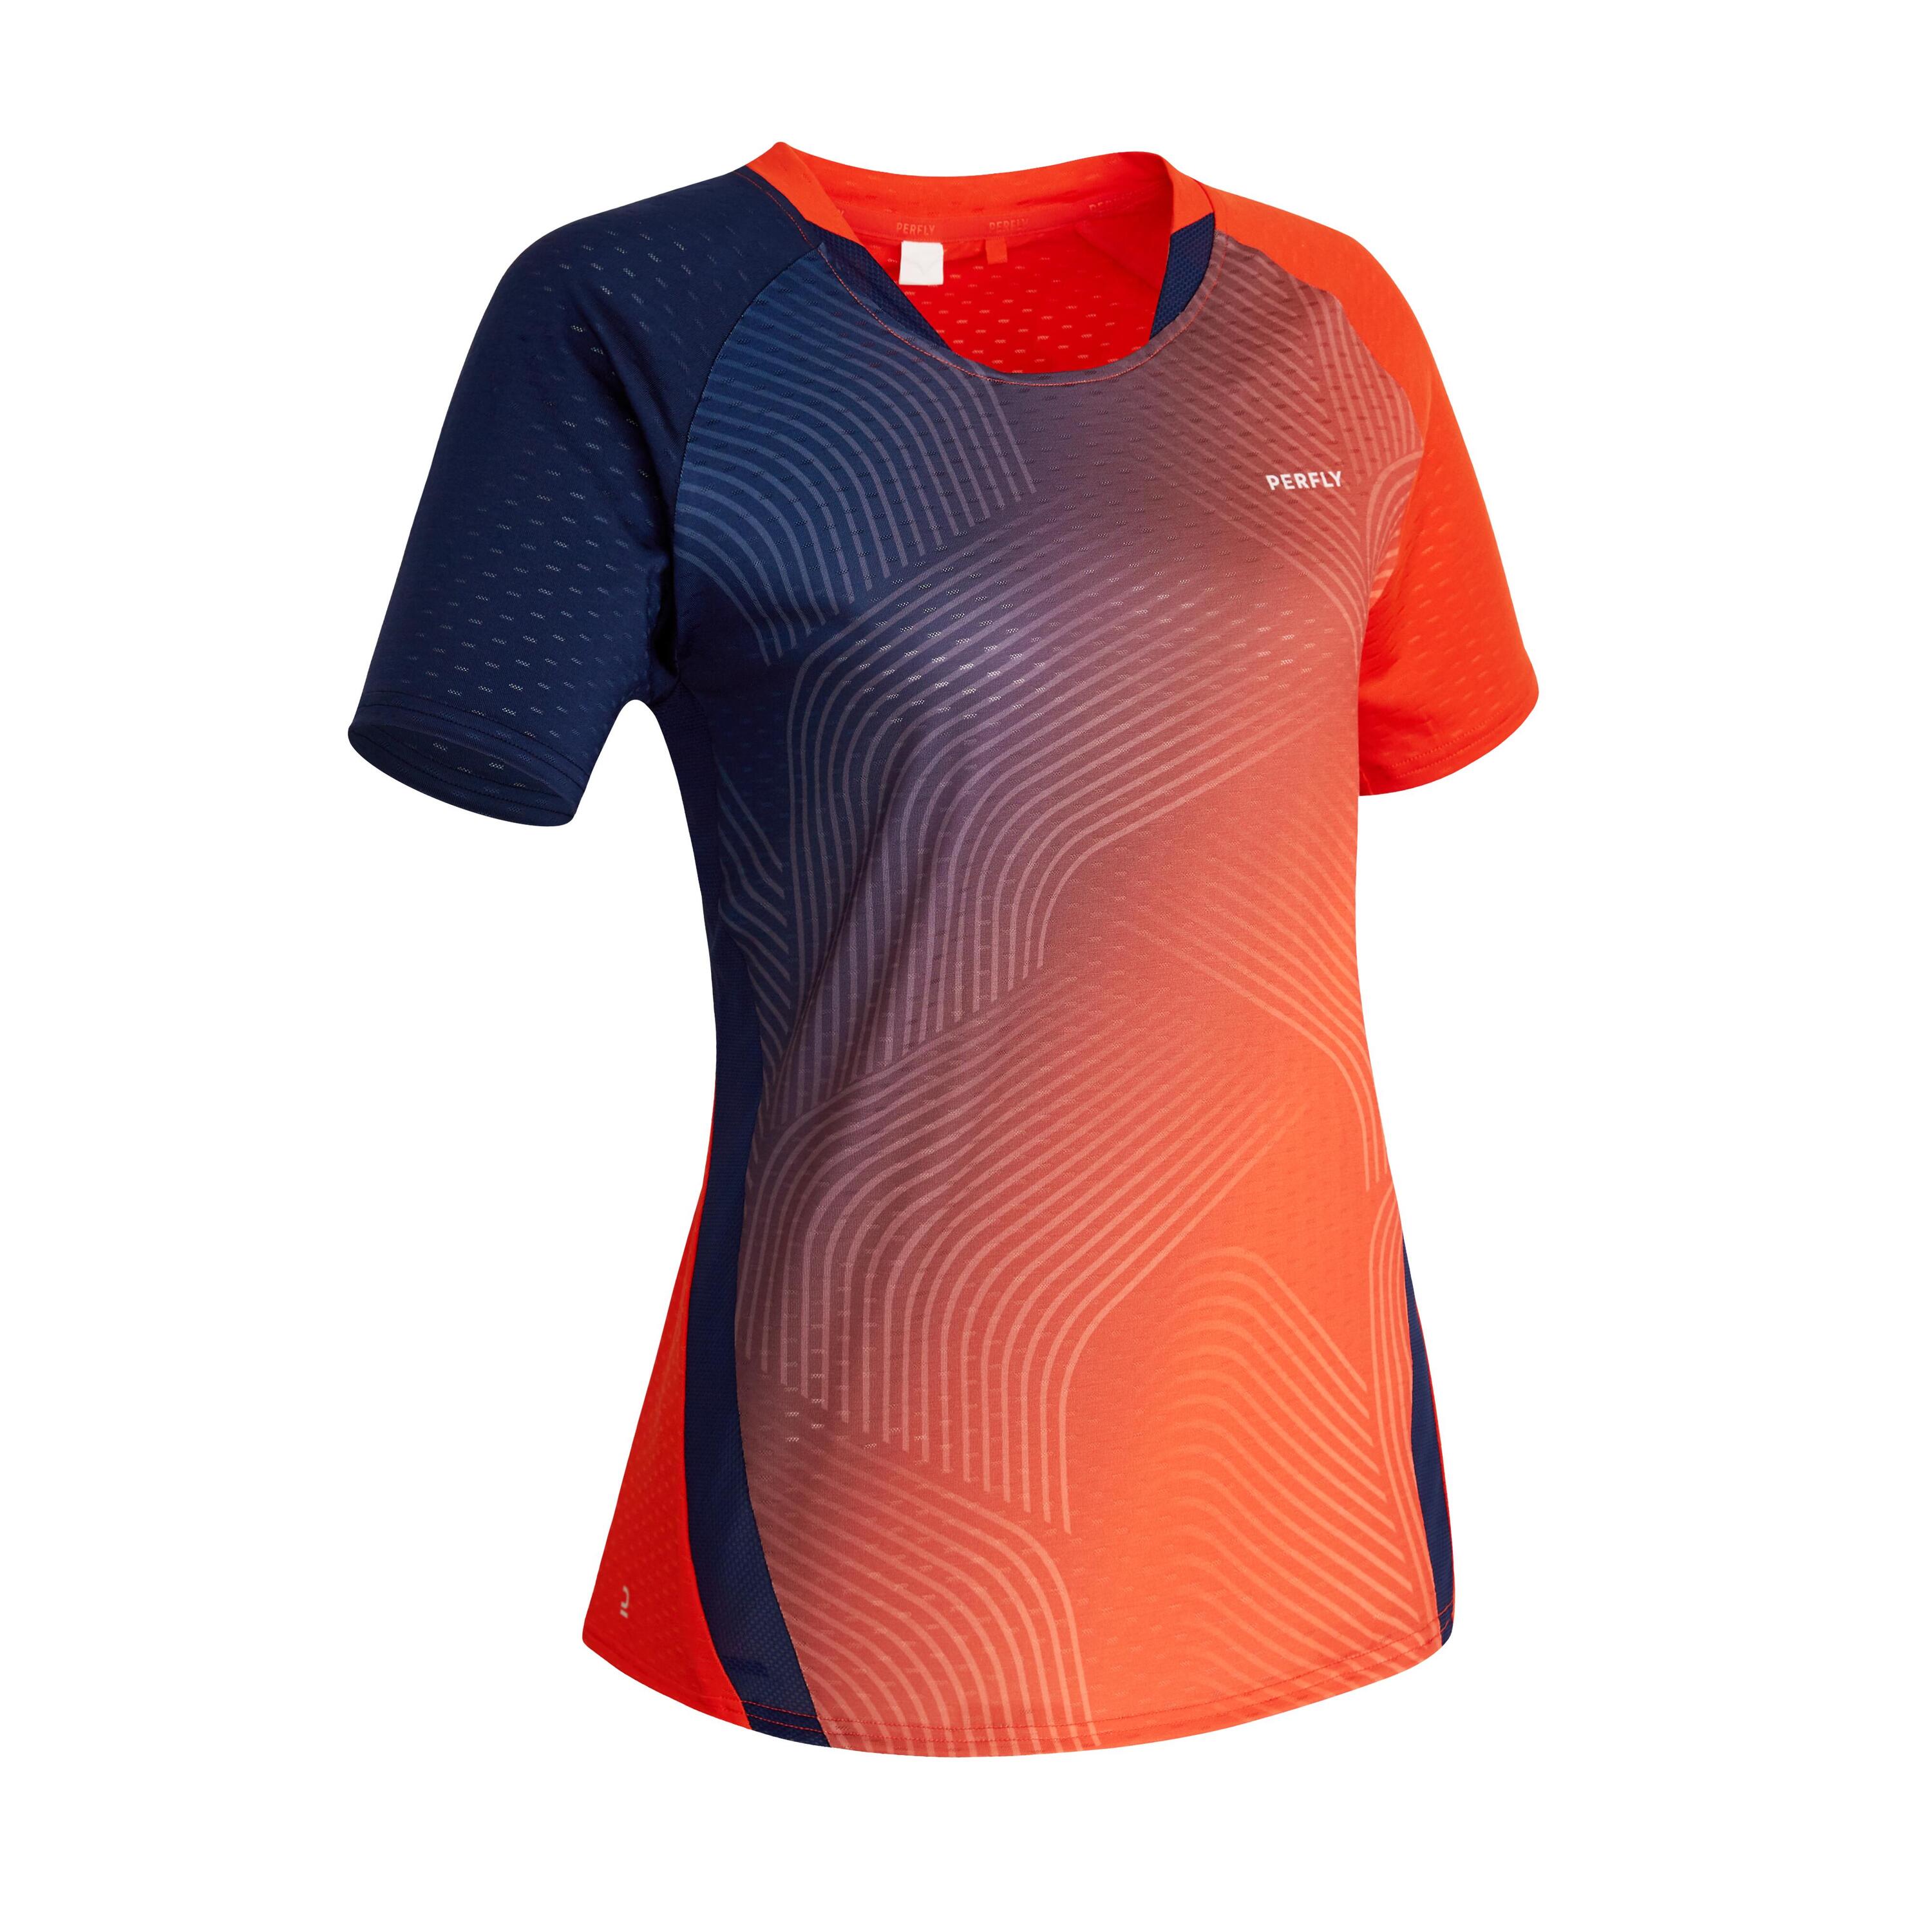 PERFLY T-SHIRT 560 W RED NAVY